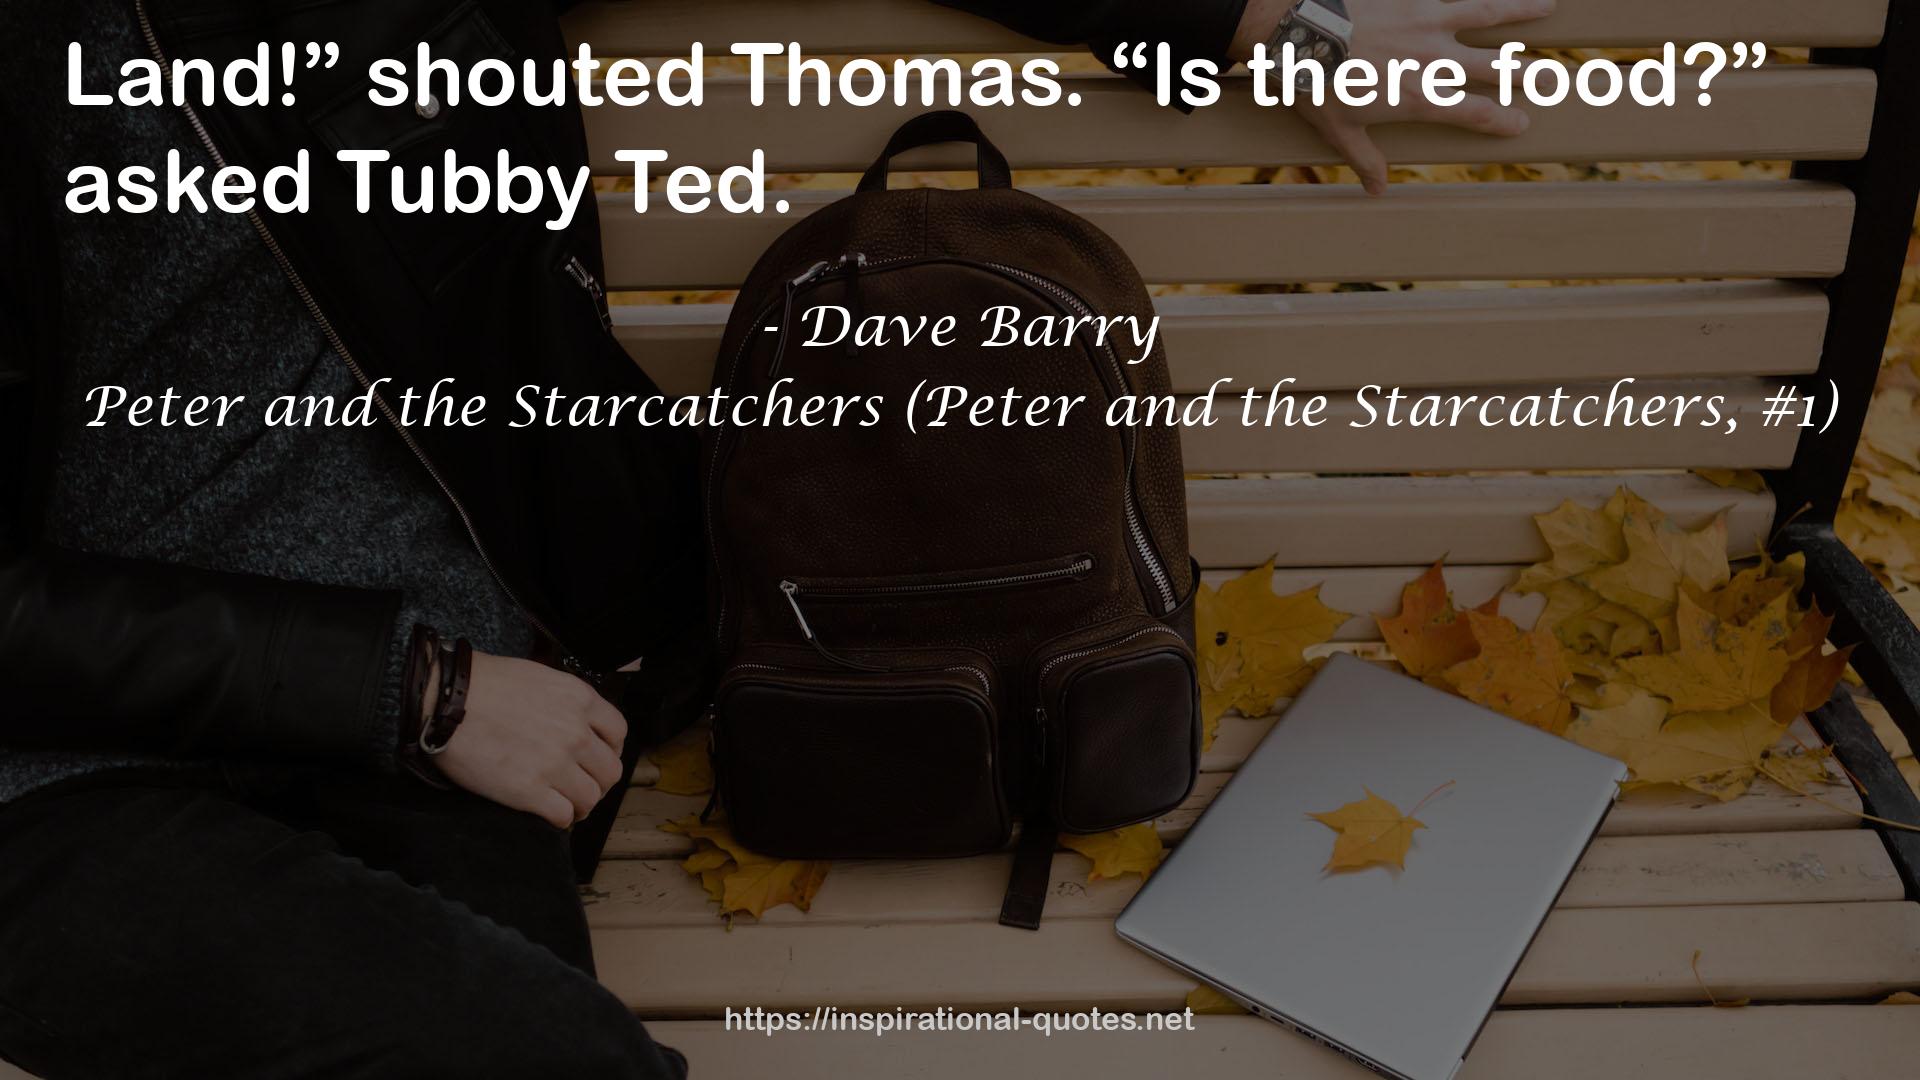 Peter and the Starcatchers (Peter and the Starcatchers, #1) QUOTES